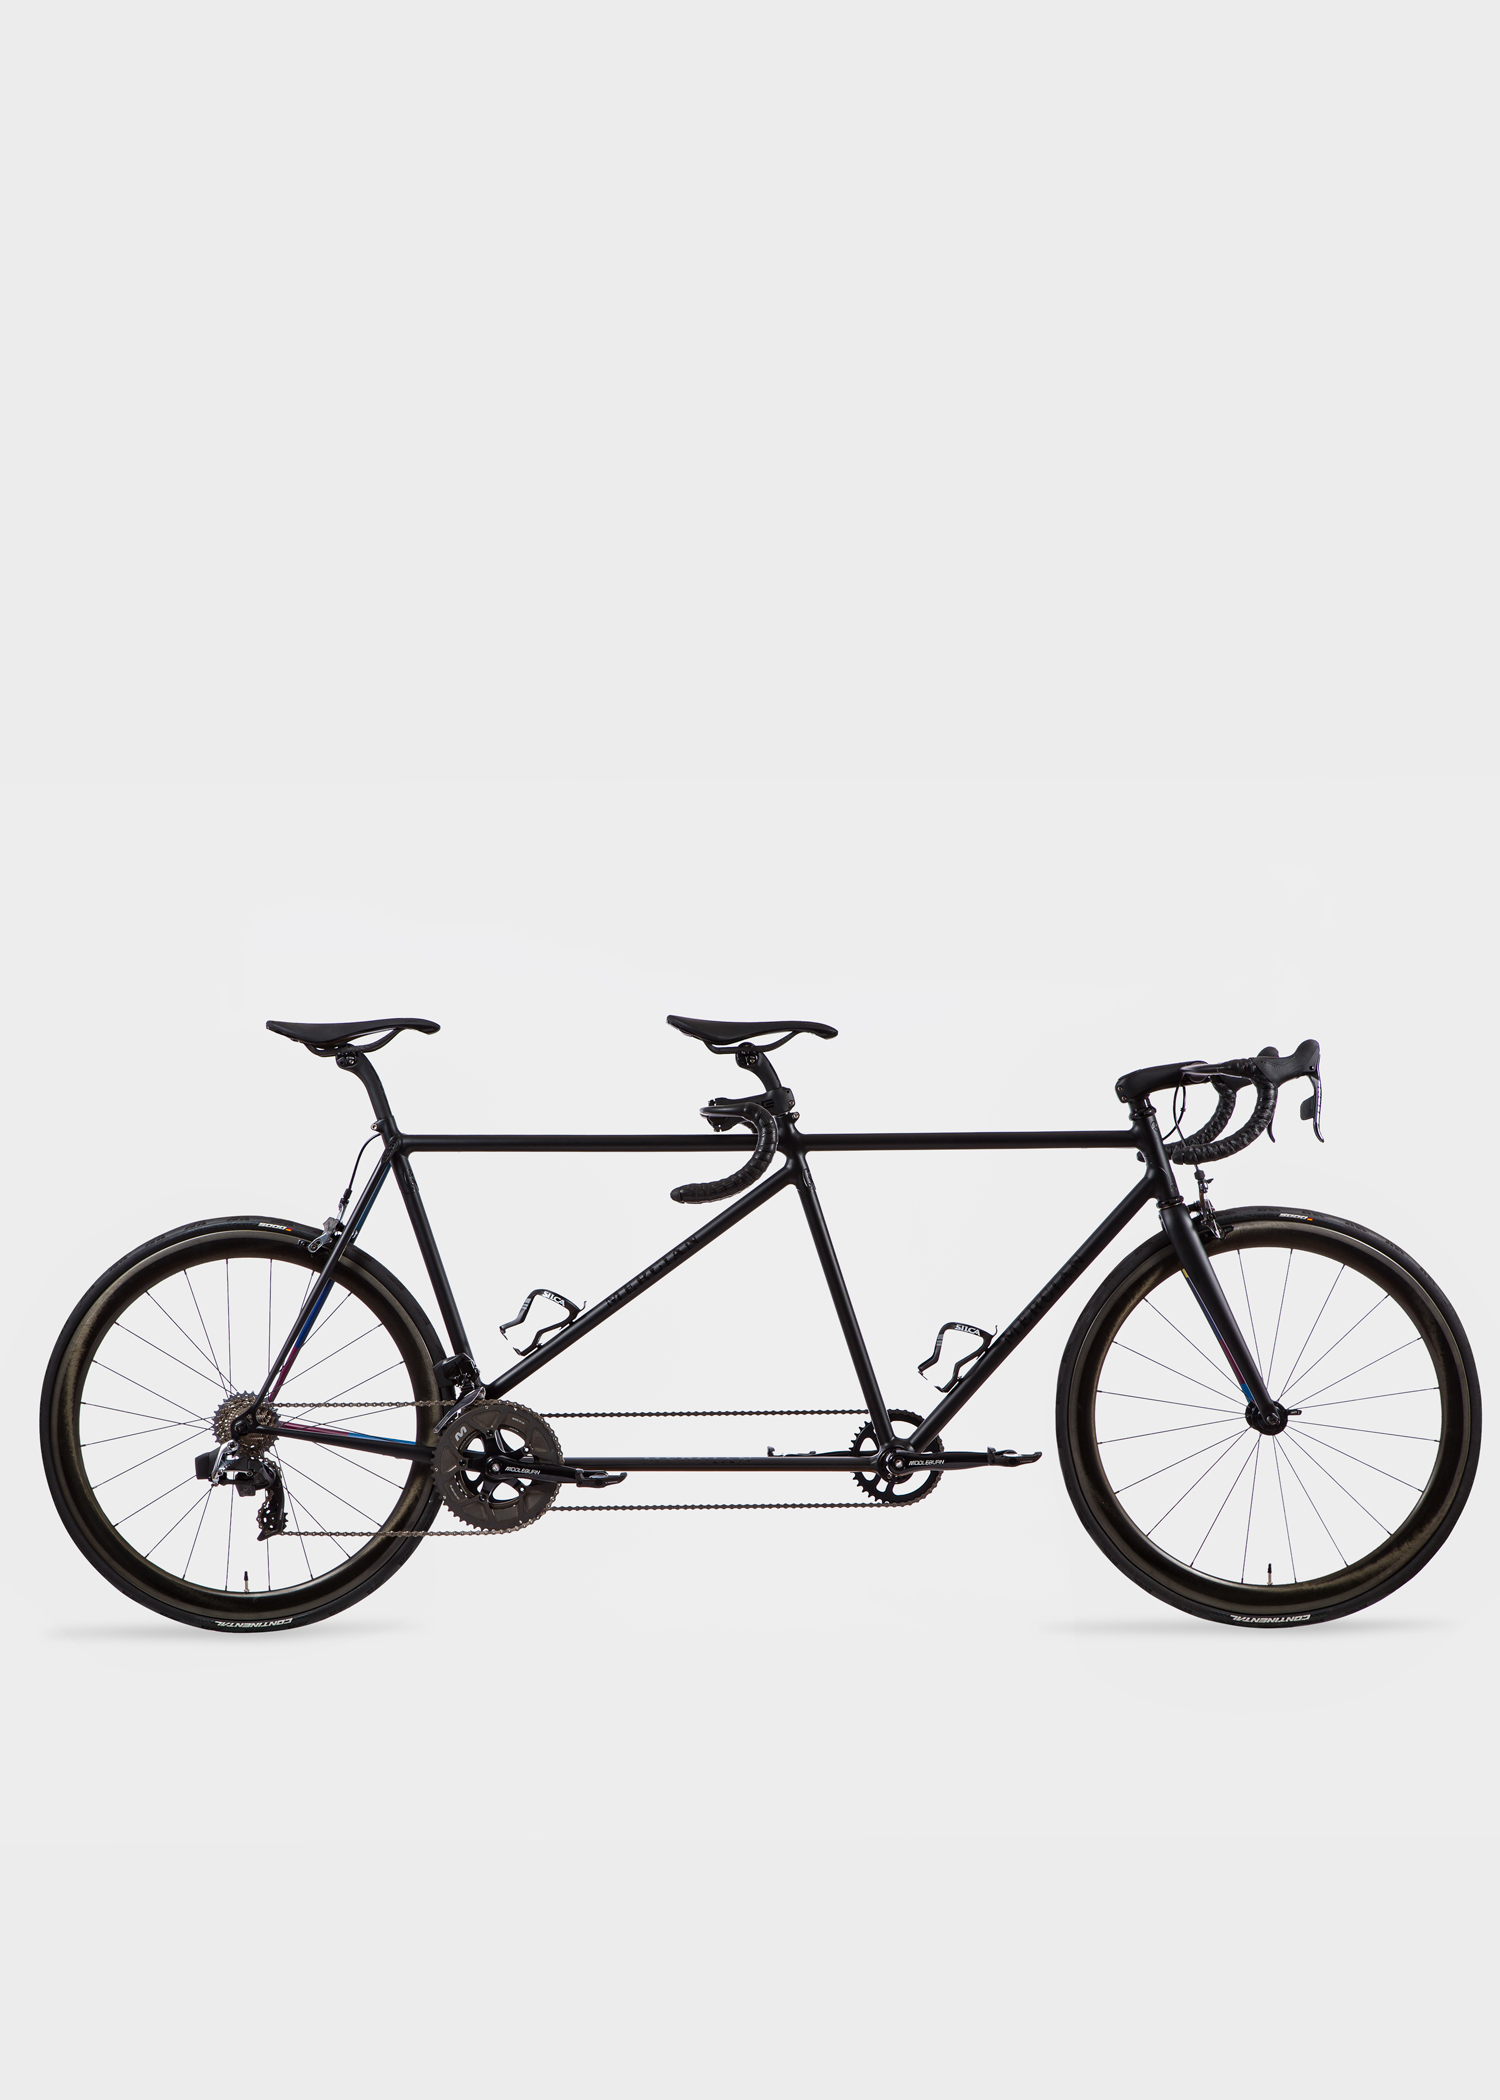 Side view - Paul Smith + Mercian - Tandem Bicycle